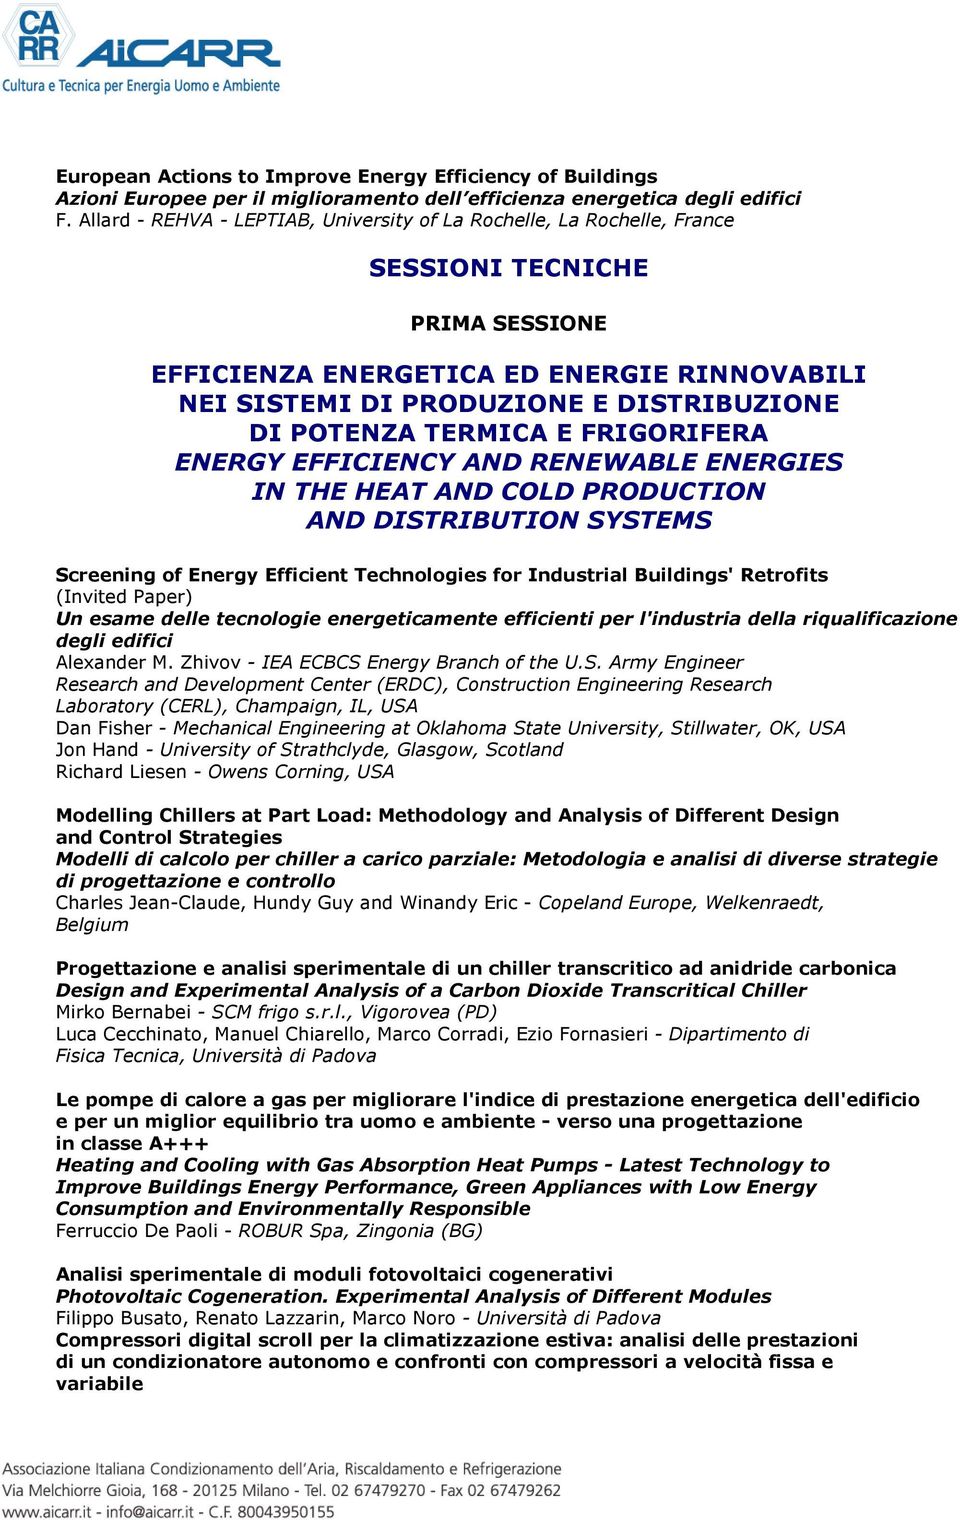 POTENZA TERMICA E FRIGORIFERA ENERGY EFFICIENCY AND RENEWABLE ENERGIES IN THE HEAT AND COLD PRODUCTION AND DISTRIBUTION SYSTEMS Screening of Energy Efficient Technologies for Industrial Buildings'